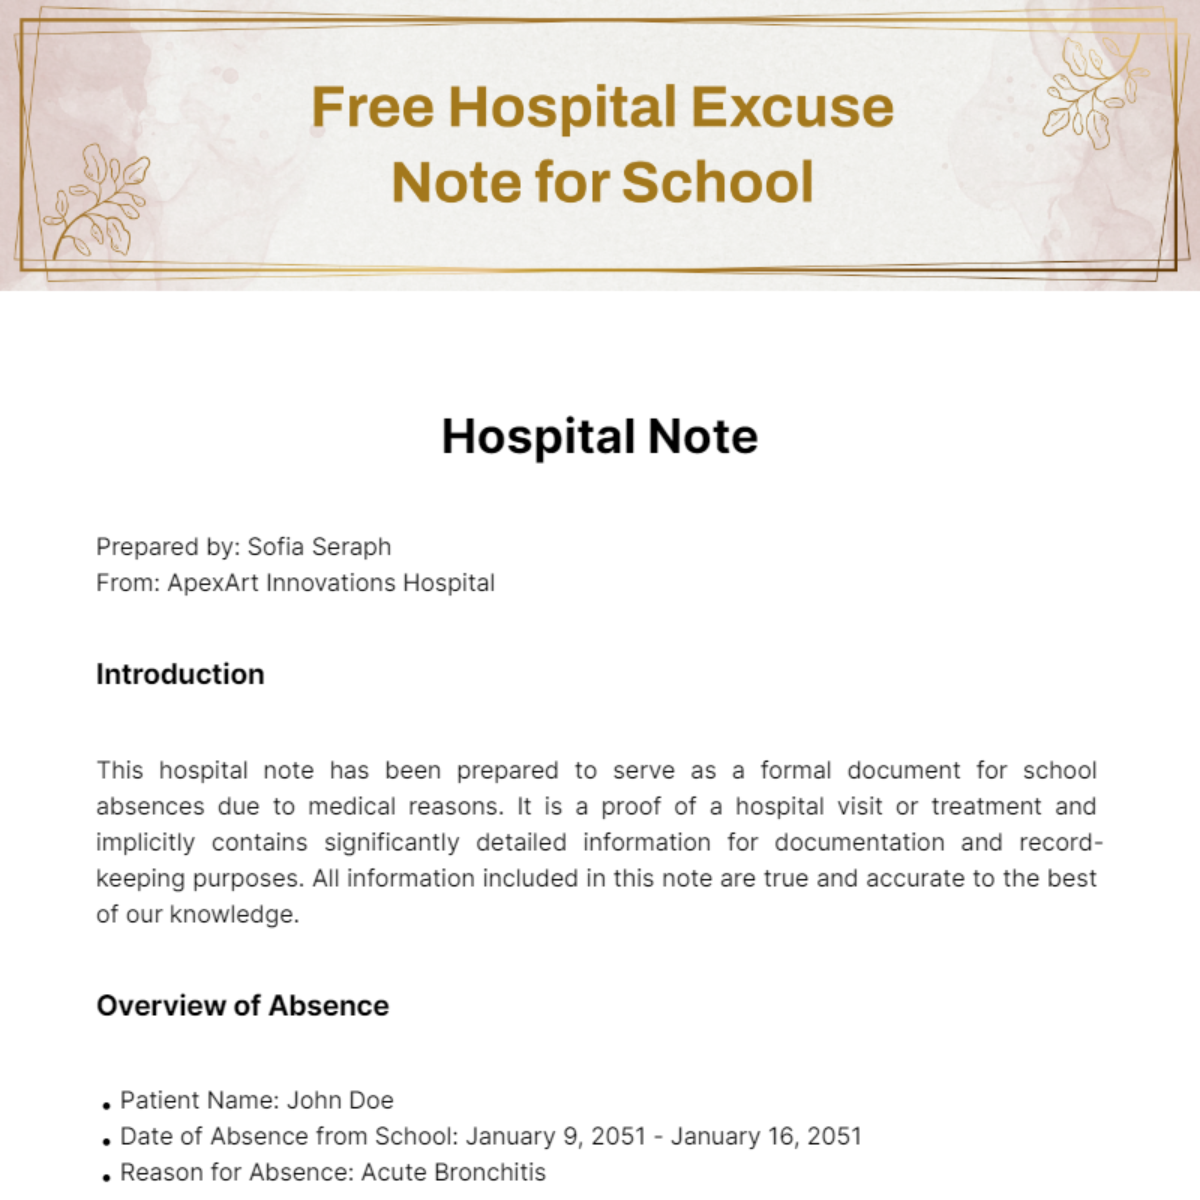 Hospital Excuse Note for School Template